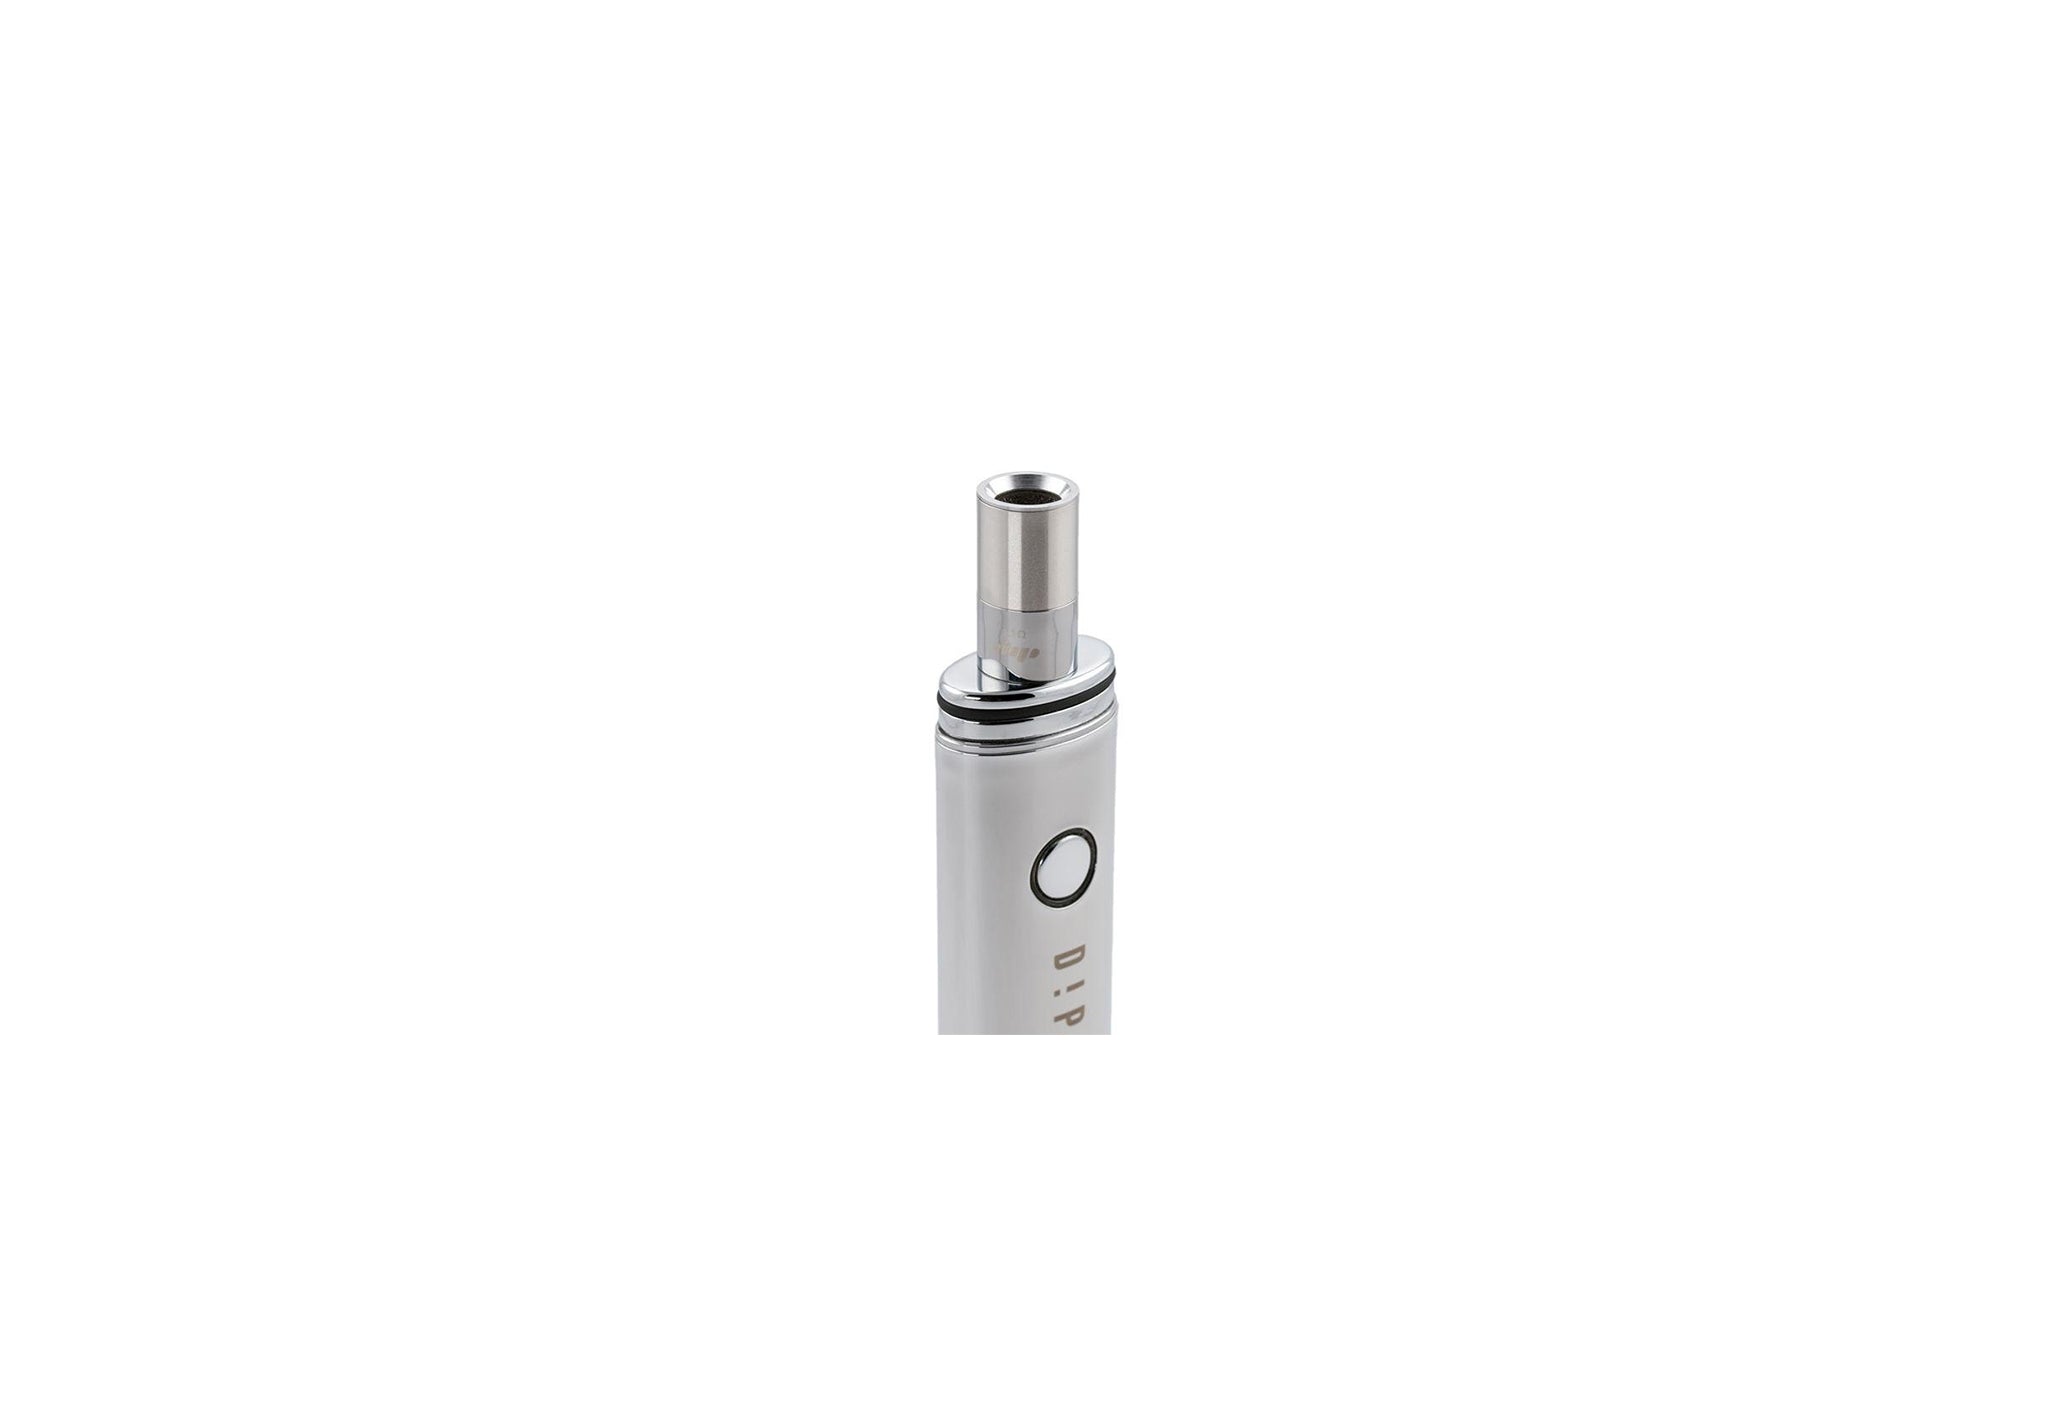 Dipper Vaporizer by Dip Devices